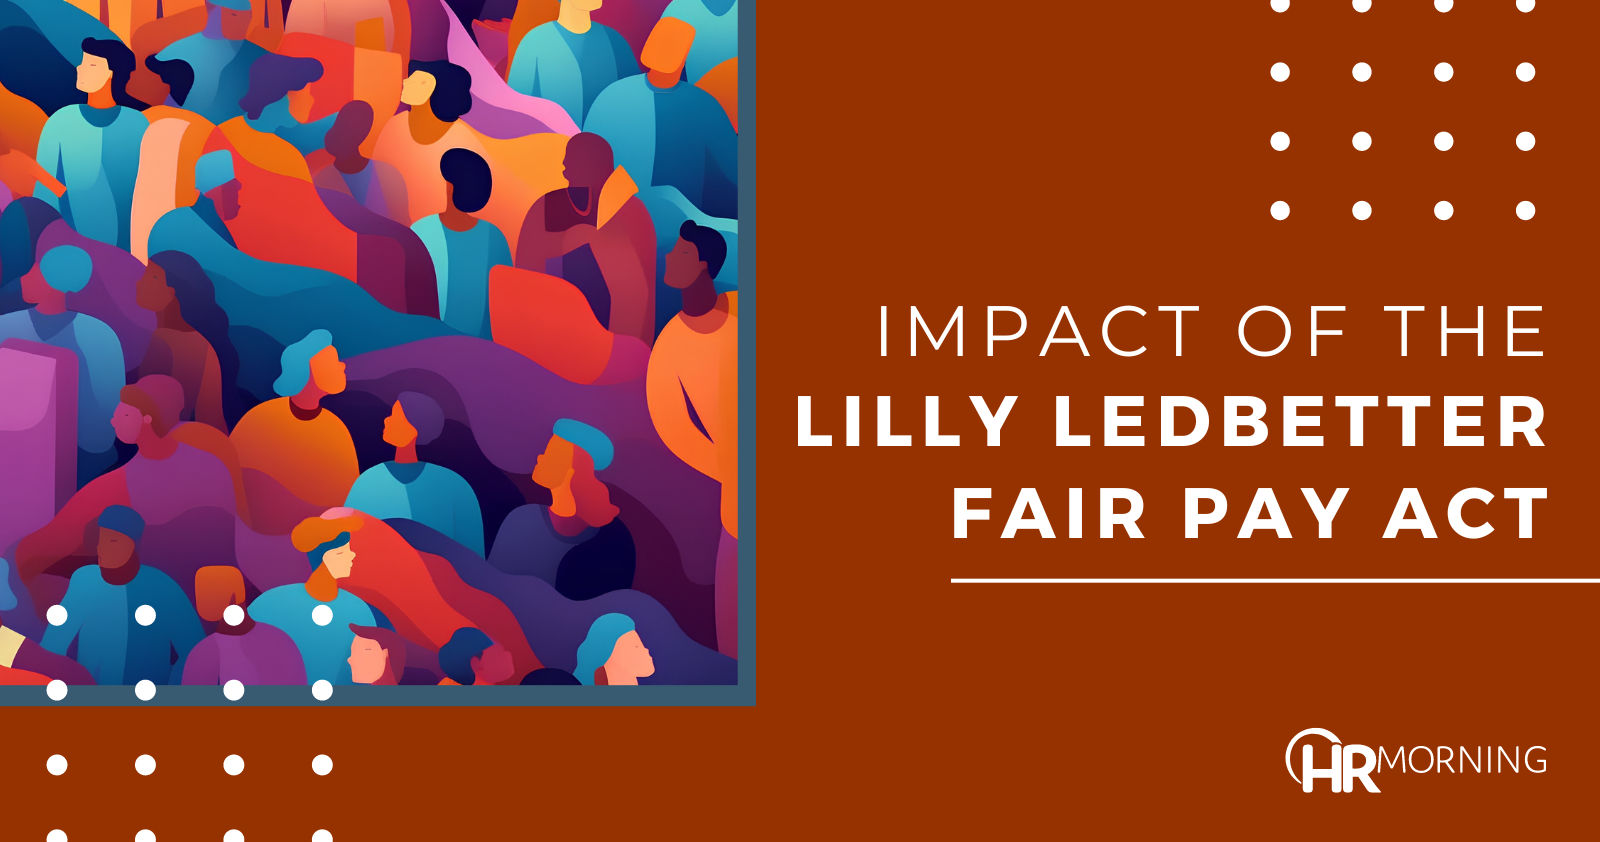 Impact of the Lilly Ledbetter Fair Pay Act